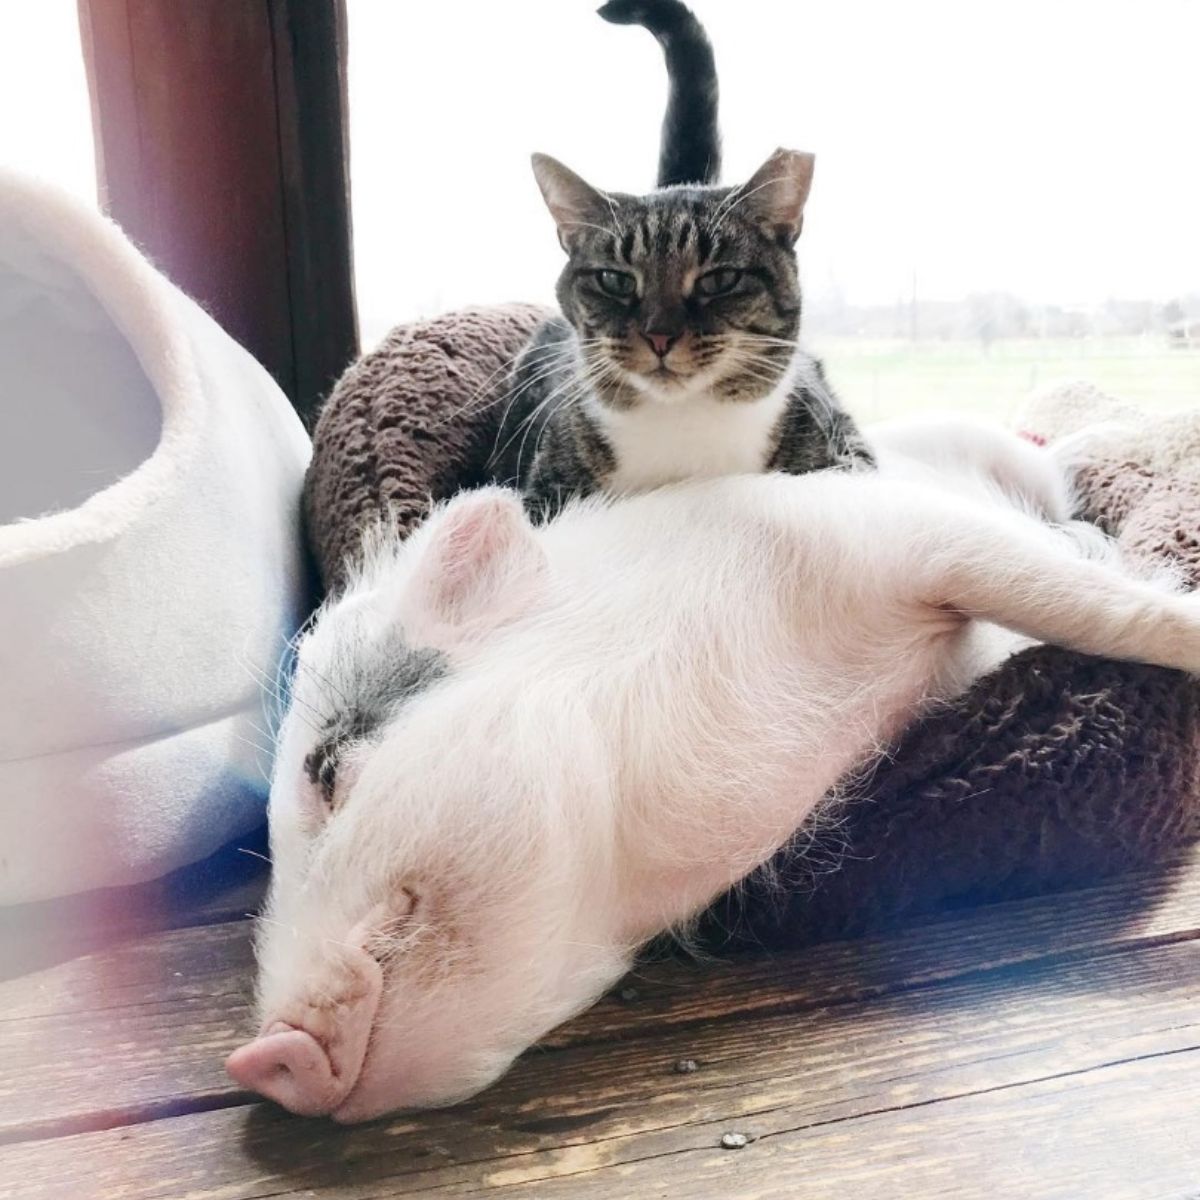 pig and cat